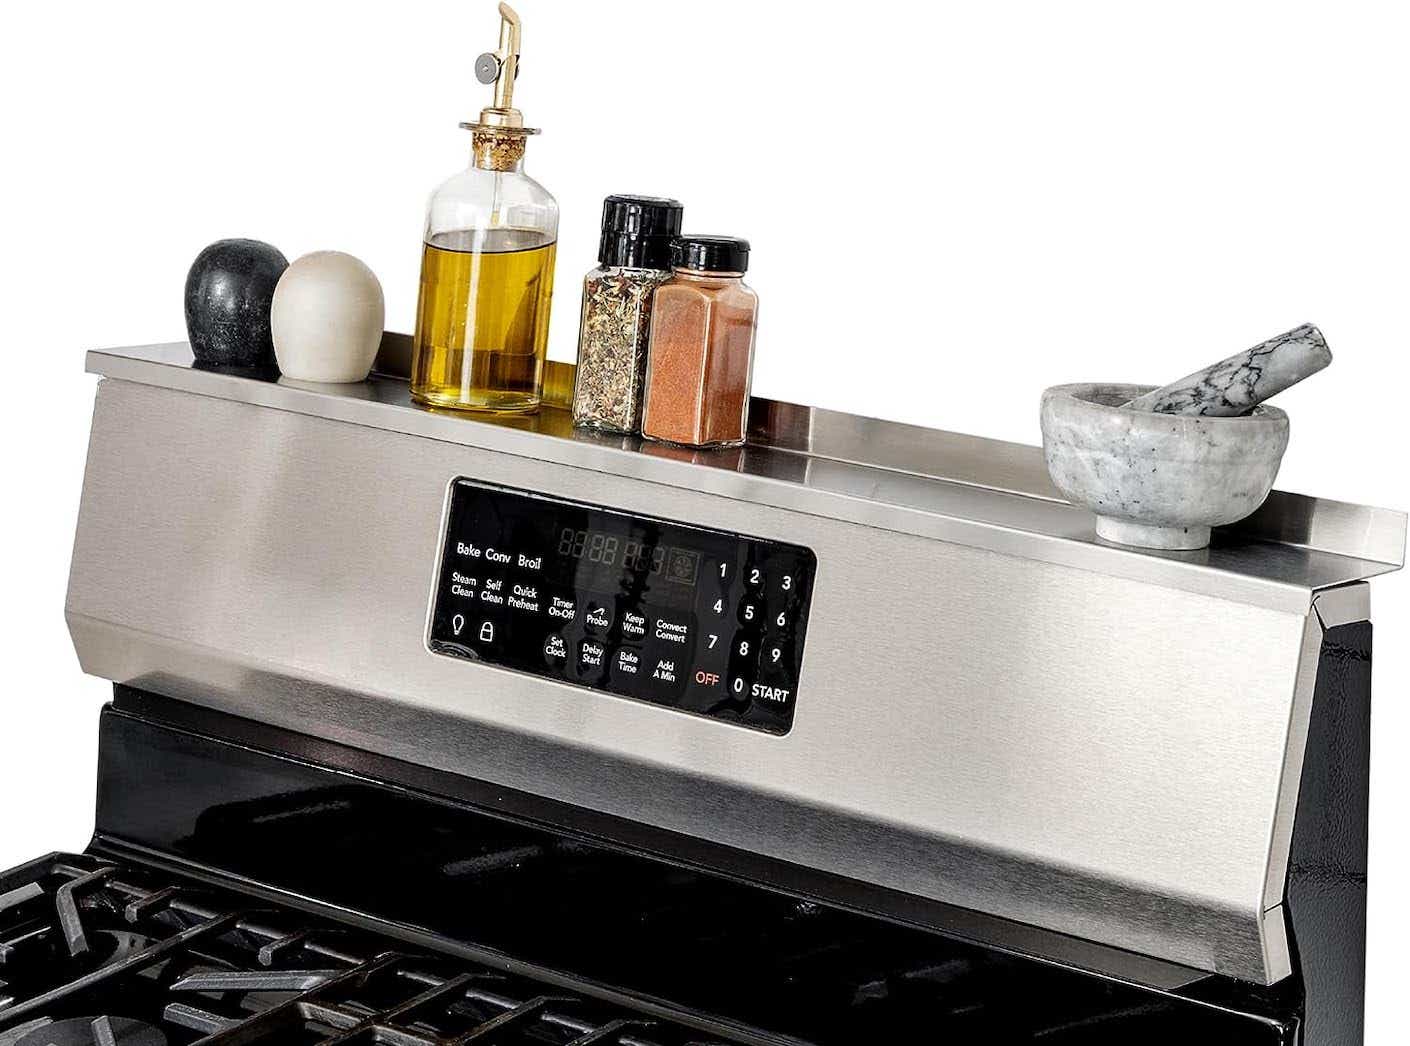 A metal magnetic shelf is placed on top of a metal stove.